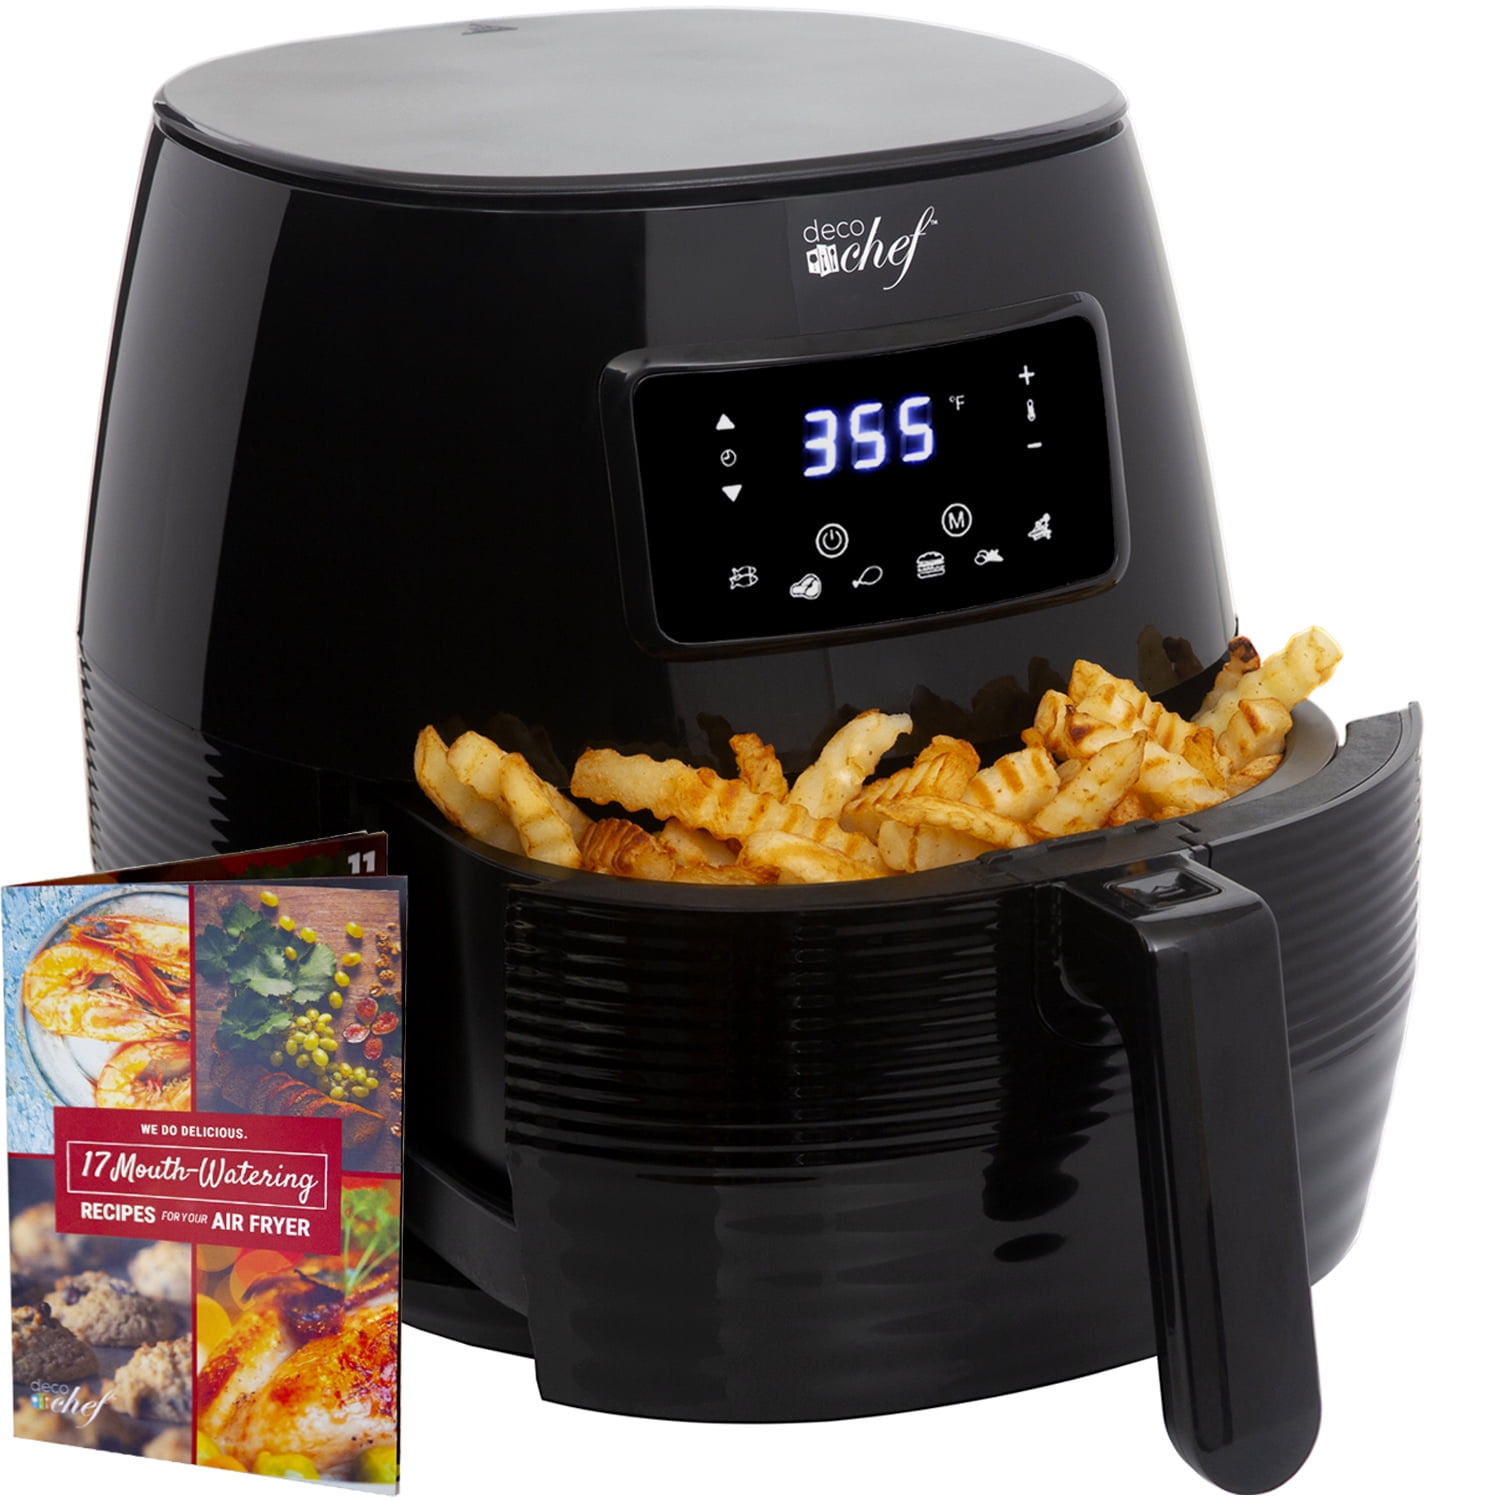 Nonstick Square Basket Air Fryer EVERUS 1700-Watts Hot Air Fryer Oven XL 5.8QT Stainless Steel Electric Air Fryer Oilless Cooker with 8 Presets 100 Free Recipes Book Included 